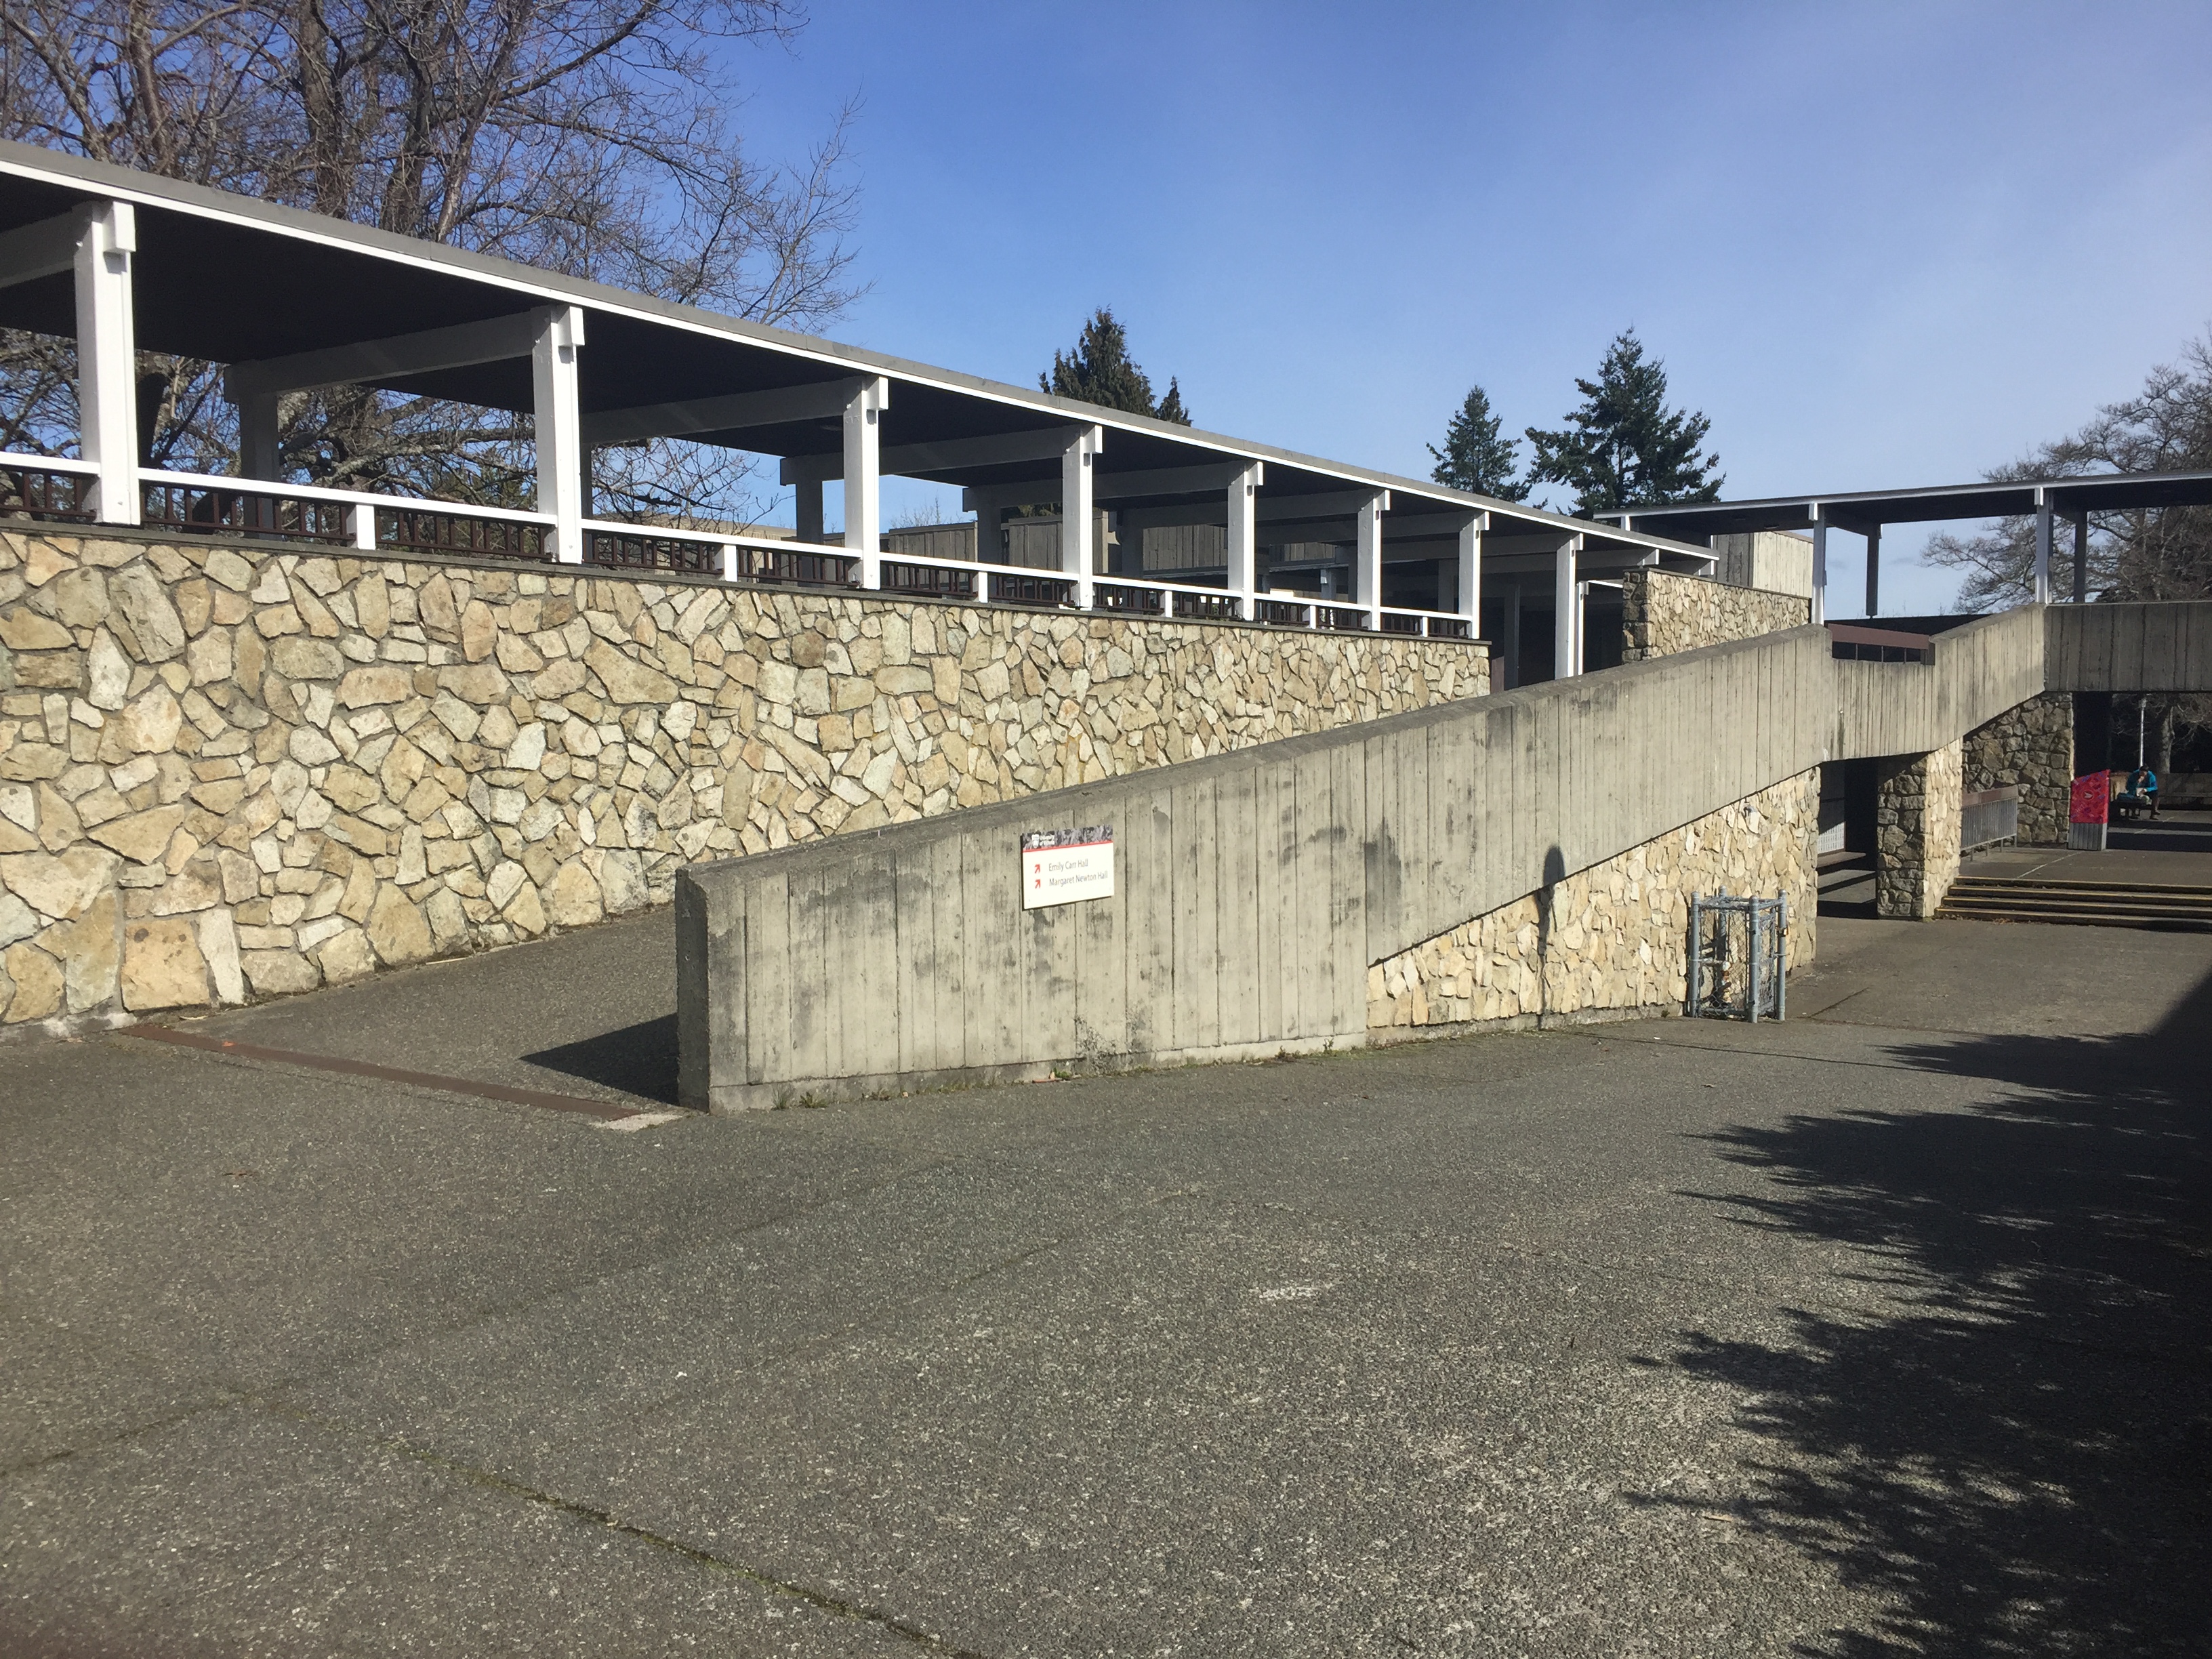 UVic plans new student housing in place of old dining hall and ...